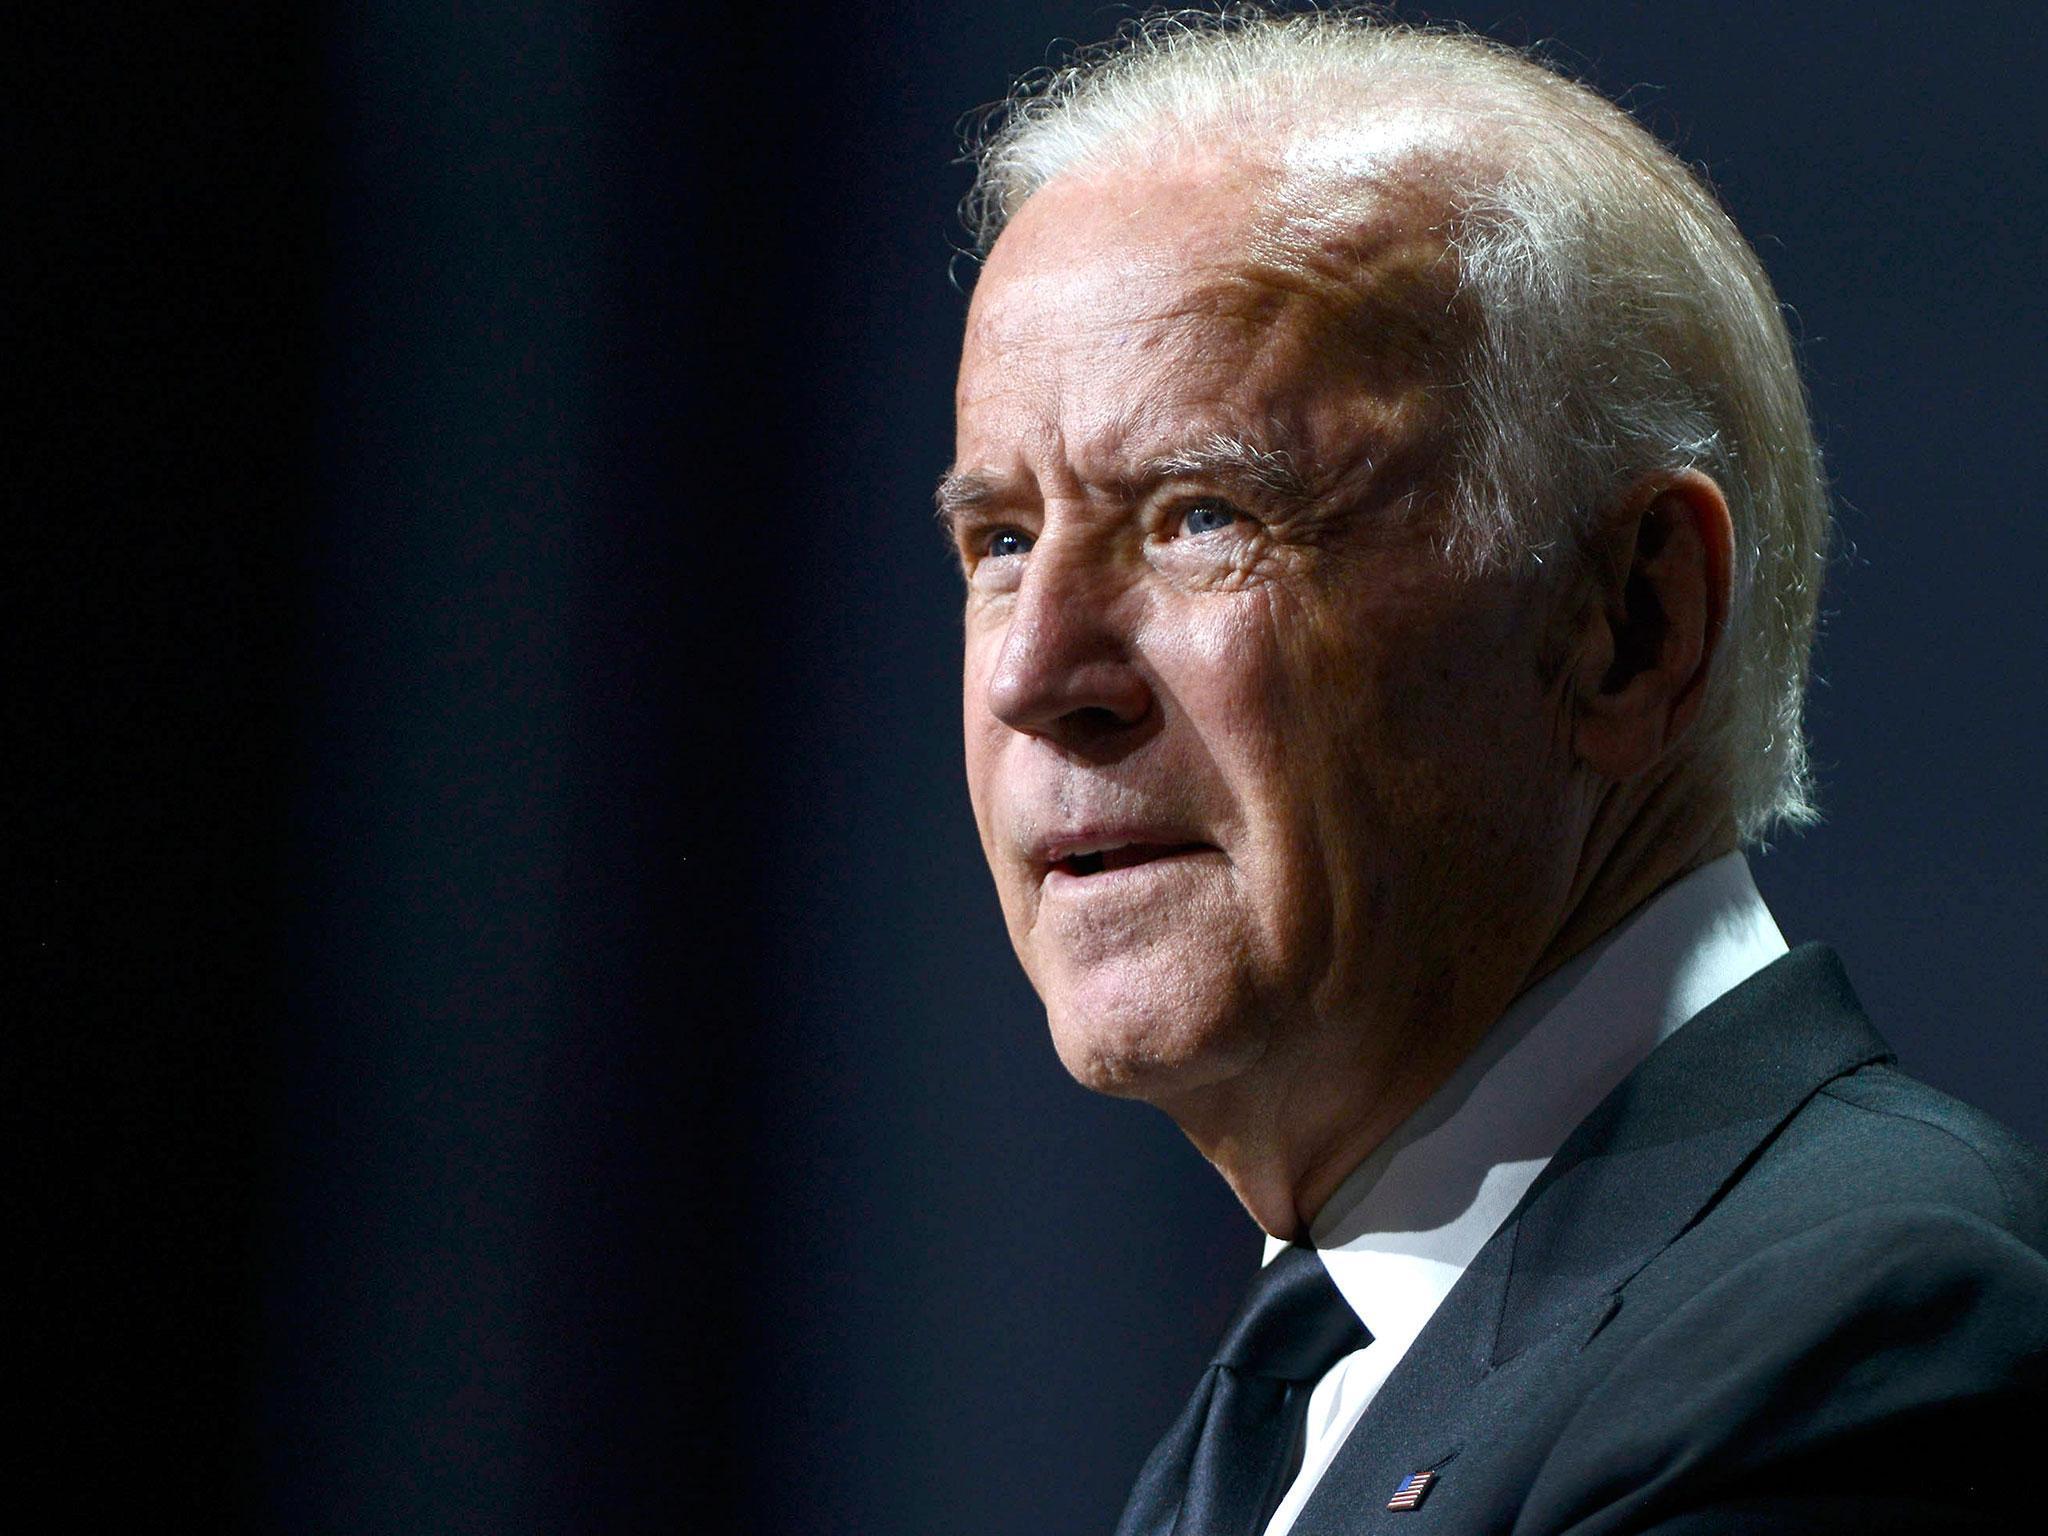 Biden used the event in Manhattan to make a plea for young men not to be silent bystanders